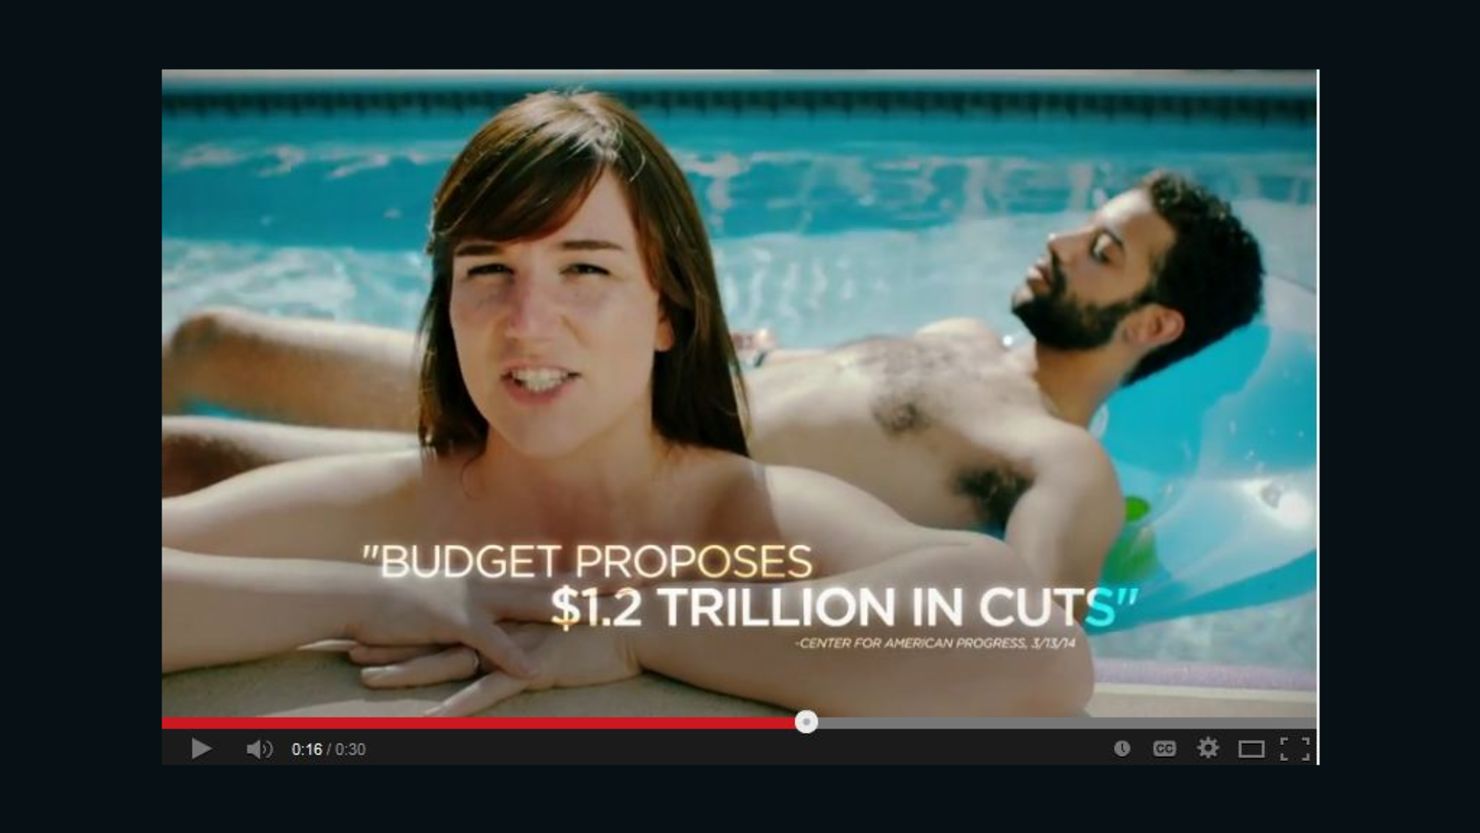 An ad for a congressional candidate appears to feature naked people. 